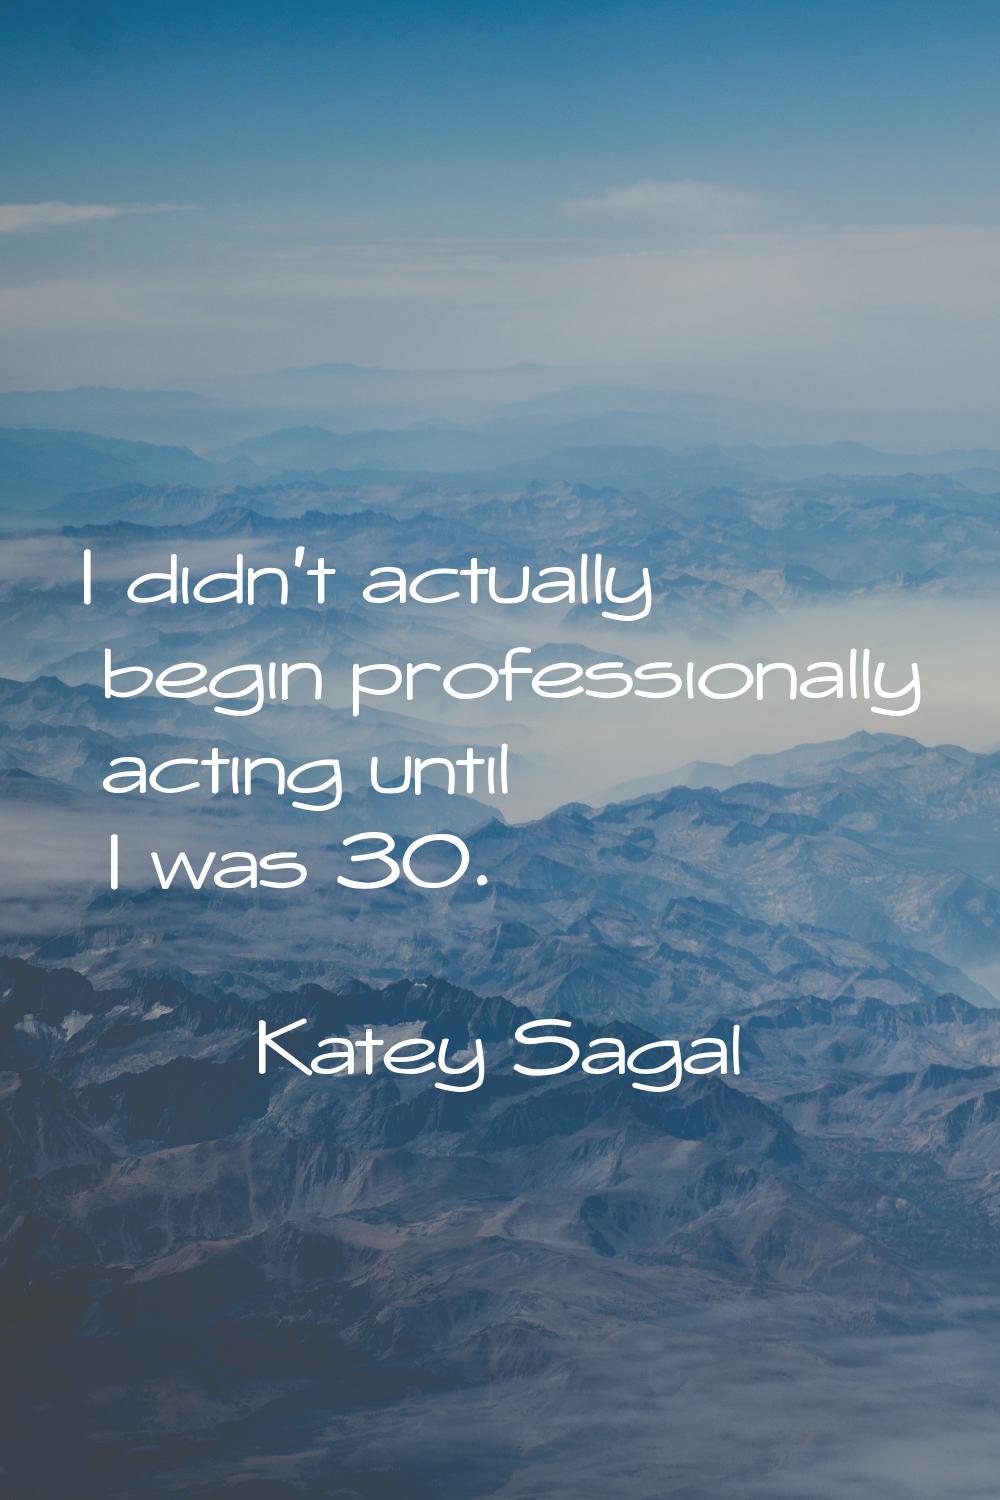 I didn't actually begin professionally acting until I was 30.